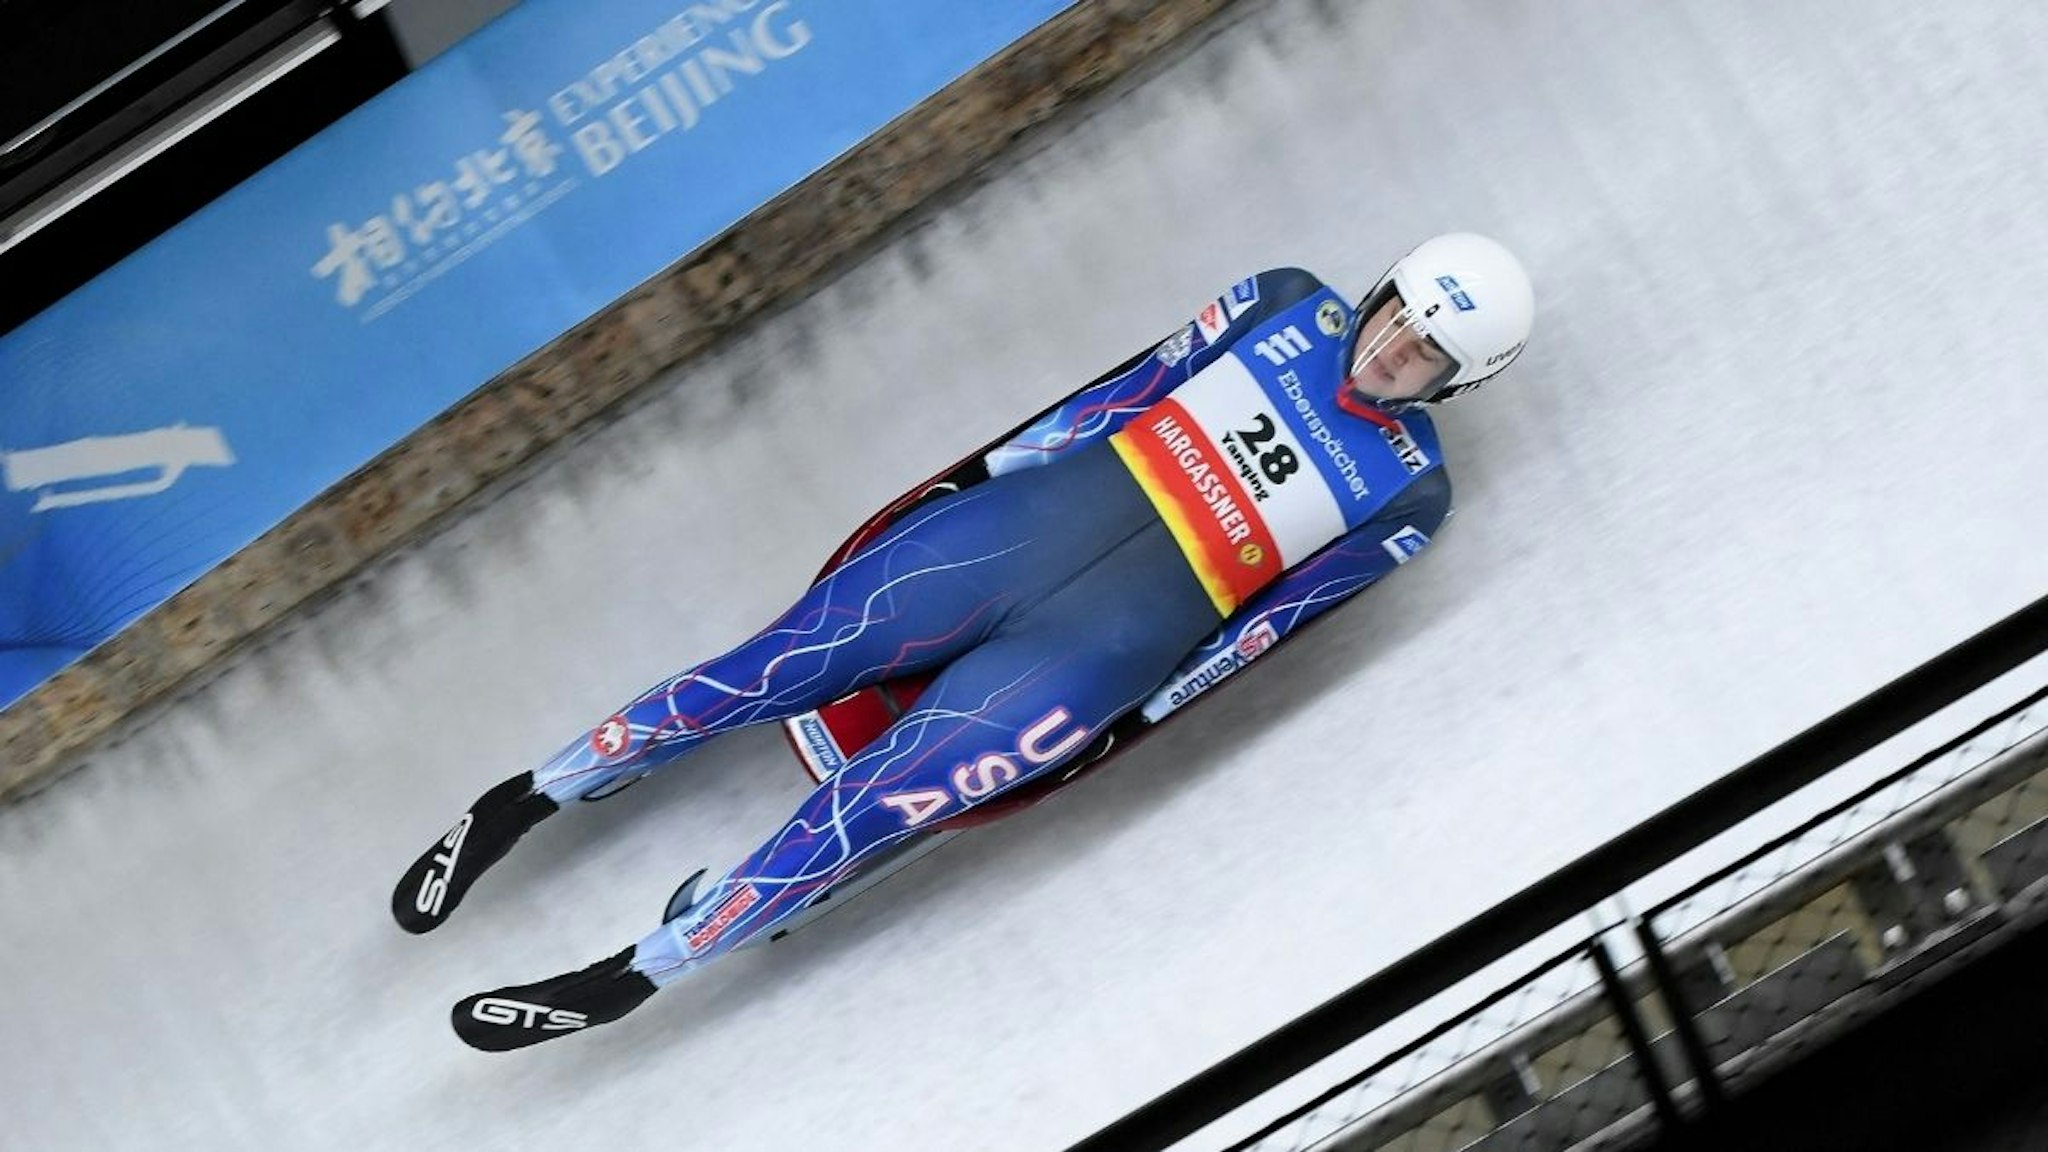 Summer Britcher of US competes in women's single race during the FIL Luge World Cup, part of a 2022 Beijing Winter Olympic Games test event, at the Yanqing National Sliding Center in Beijing on November 21, 2021.